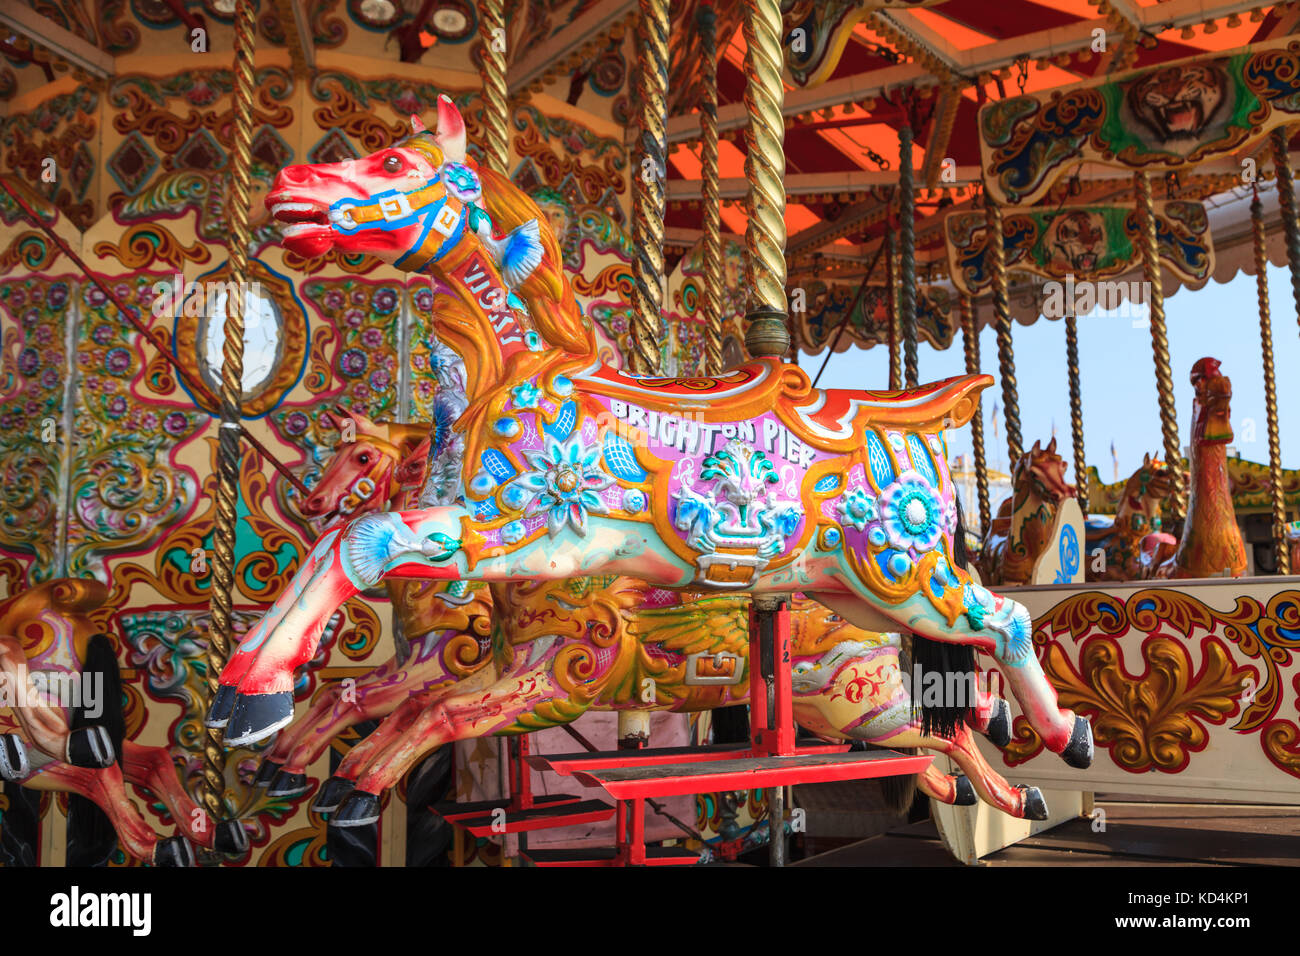 Painted antique wooden horse on a traditional Victorian British seaside carousel fairground ride, England, UK Stock Photo